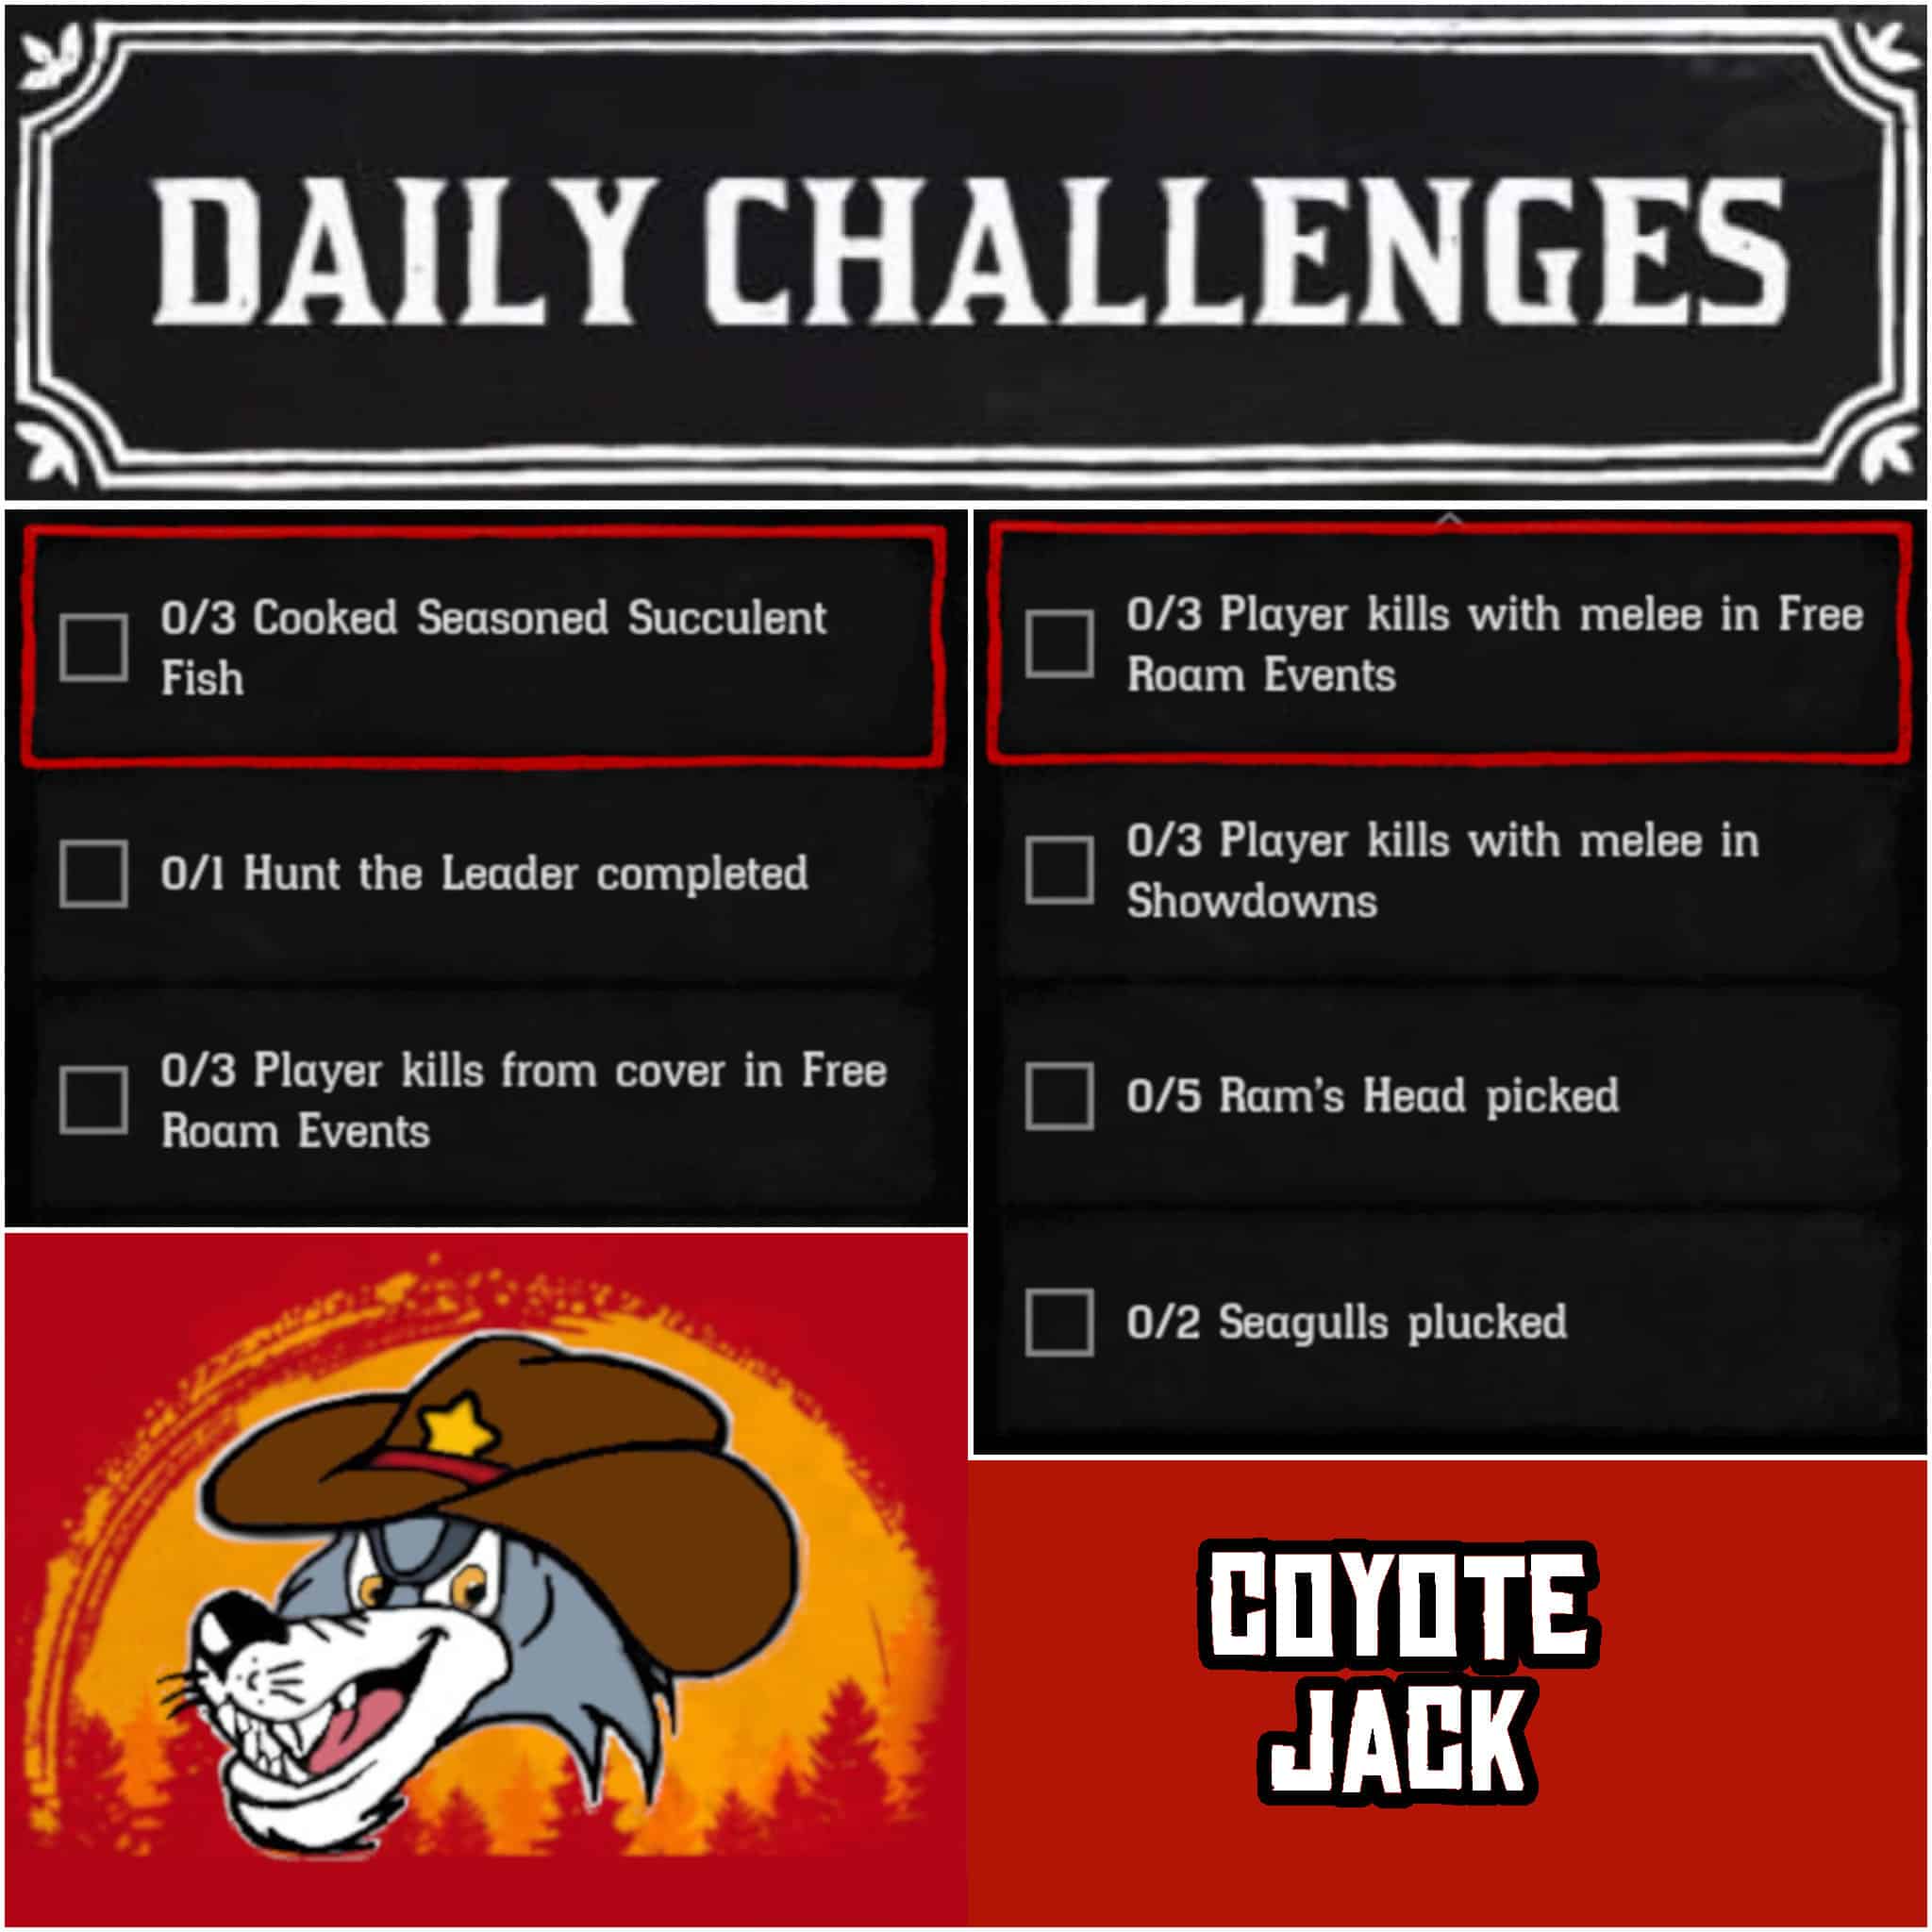 You are currently viewing Tuesday 05 January Daily Challenges